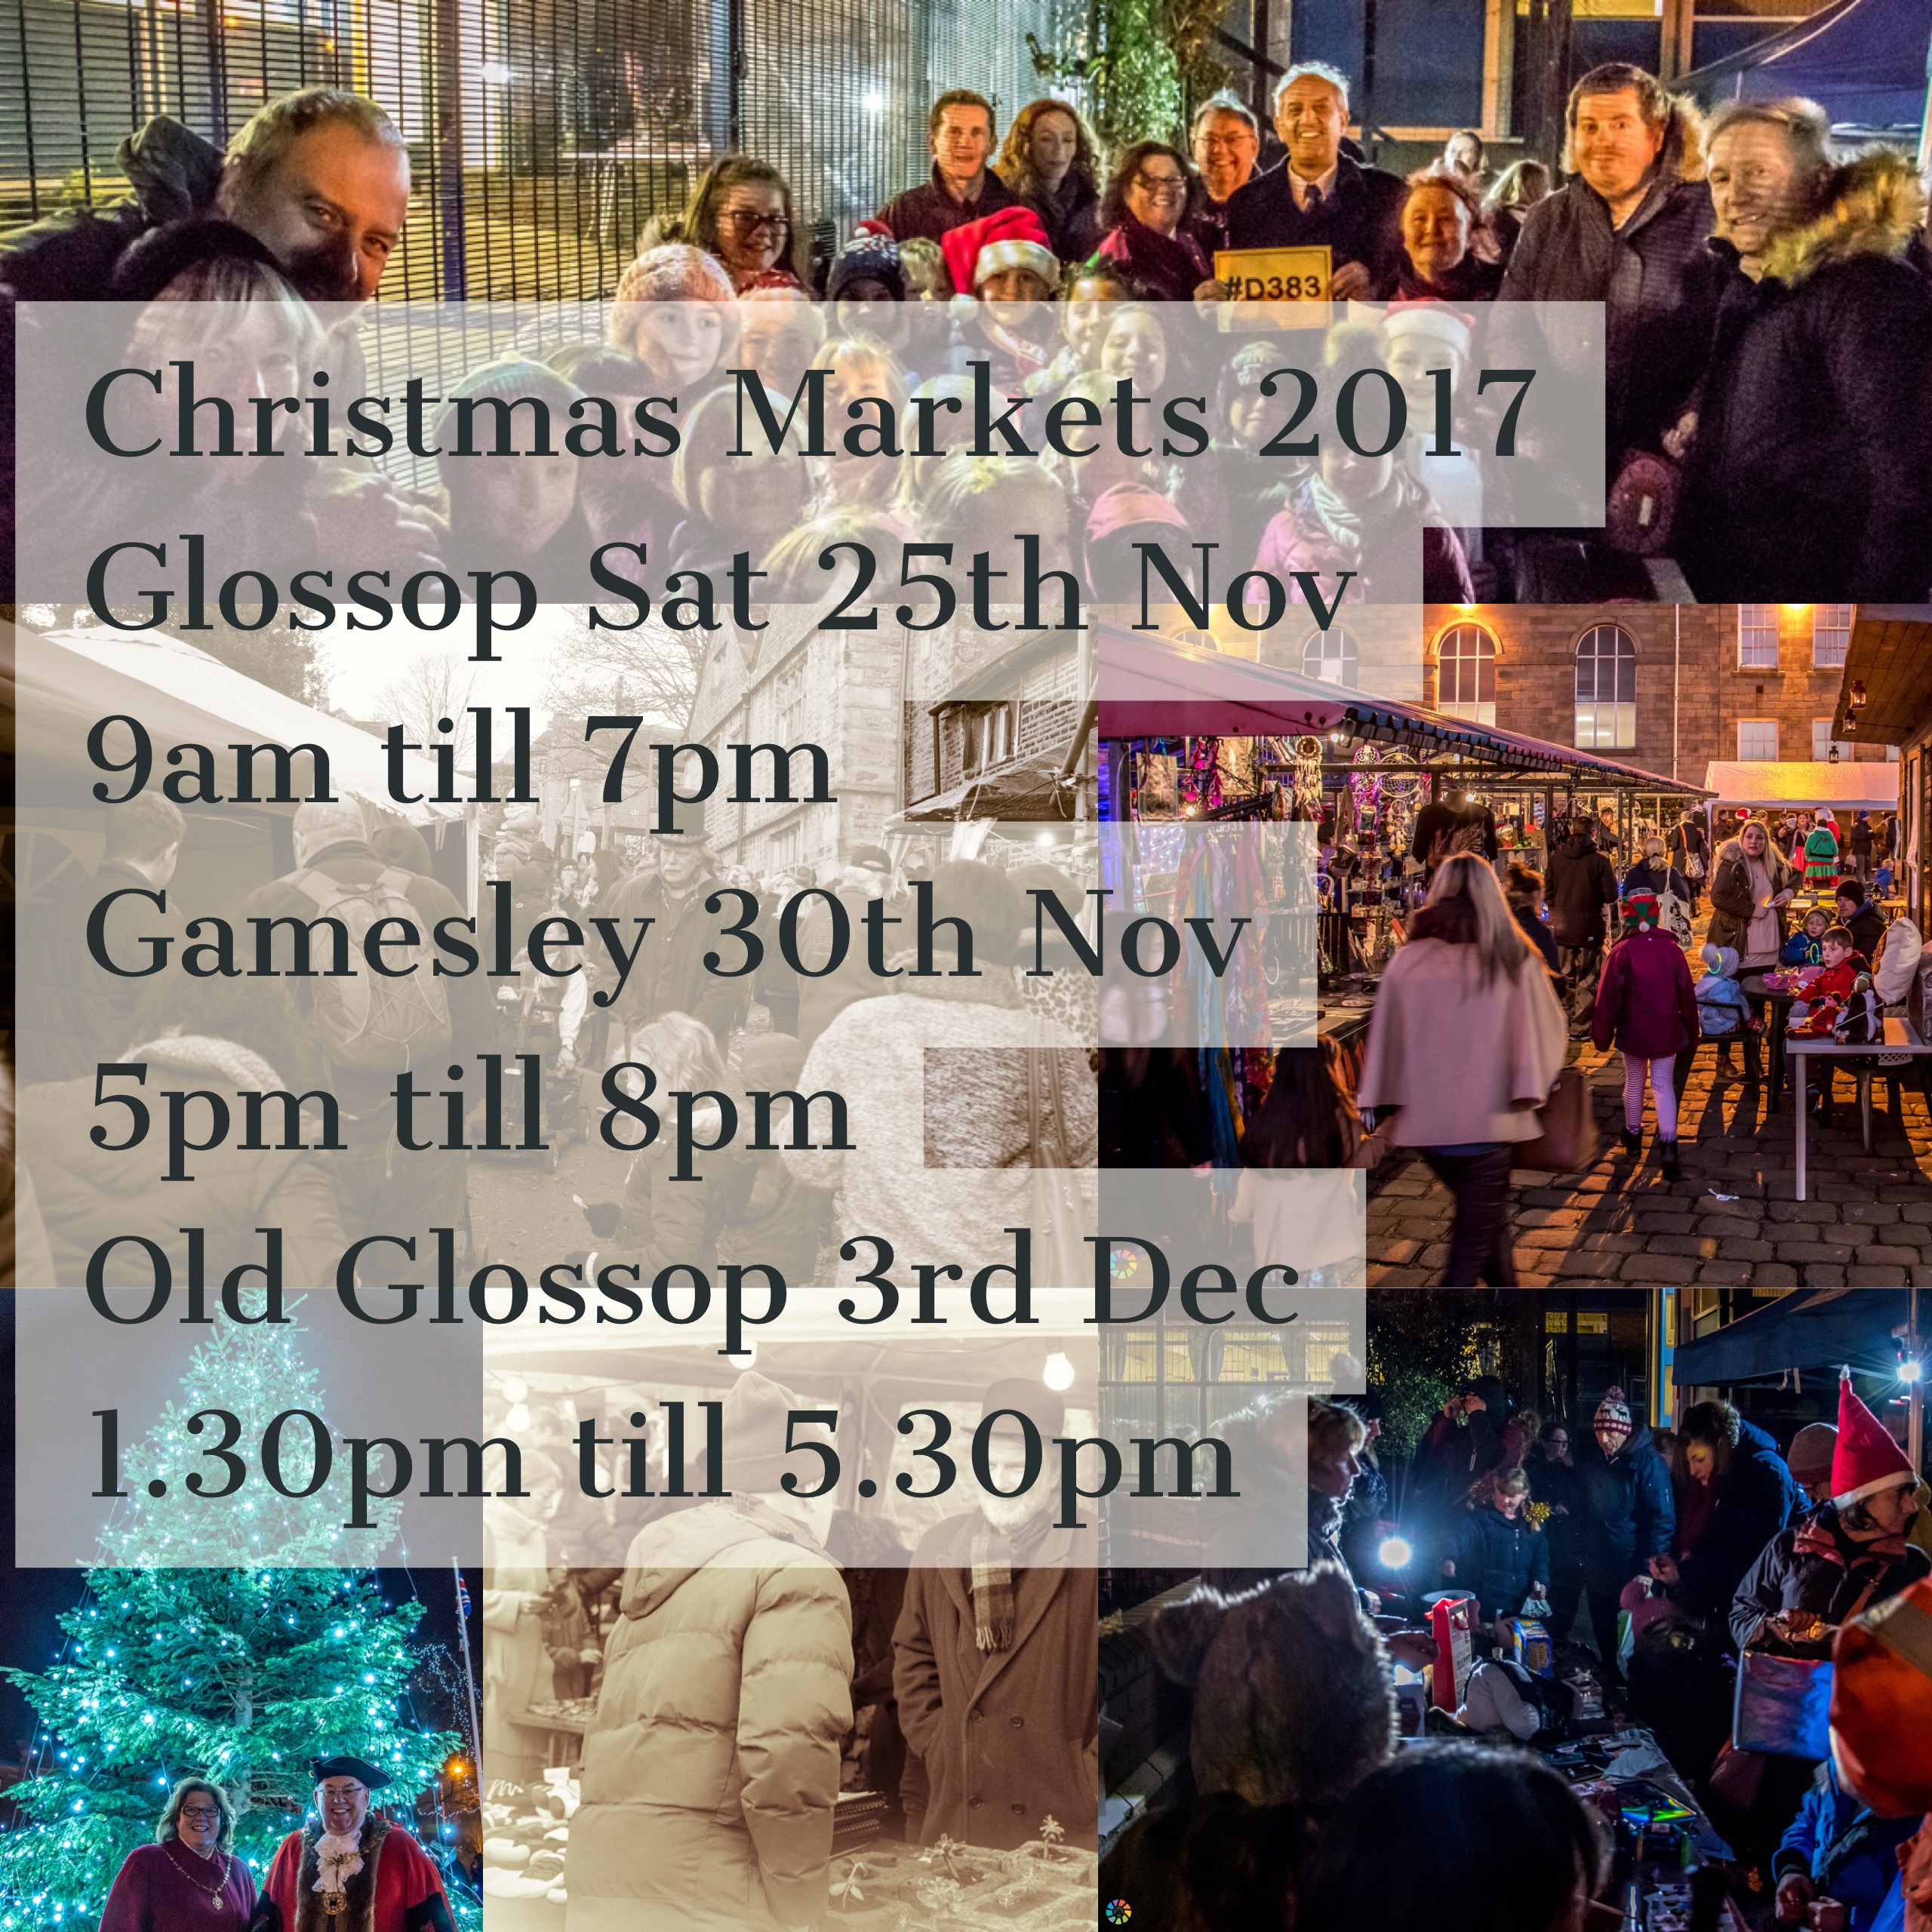 Gamesley, Glossop and Old Glossop Christmas Markets